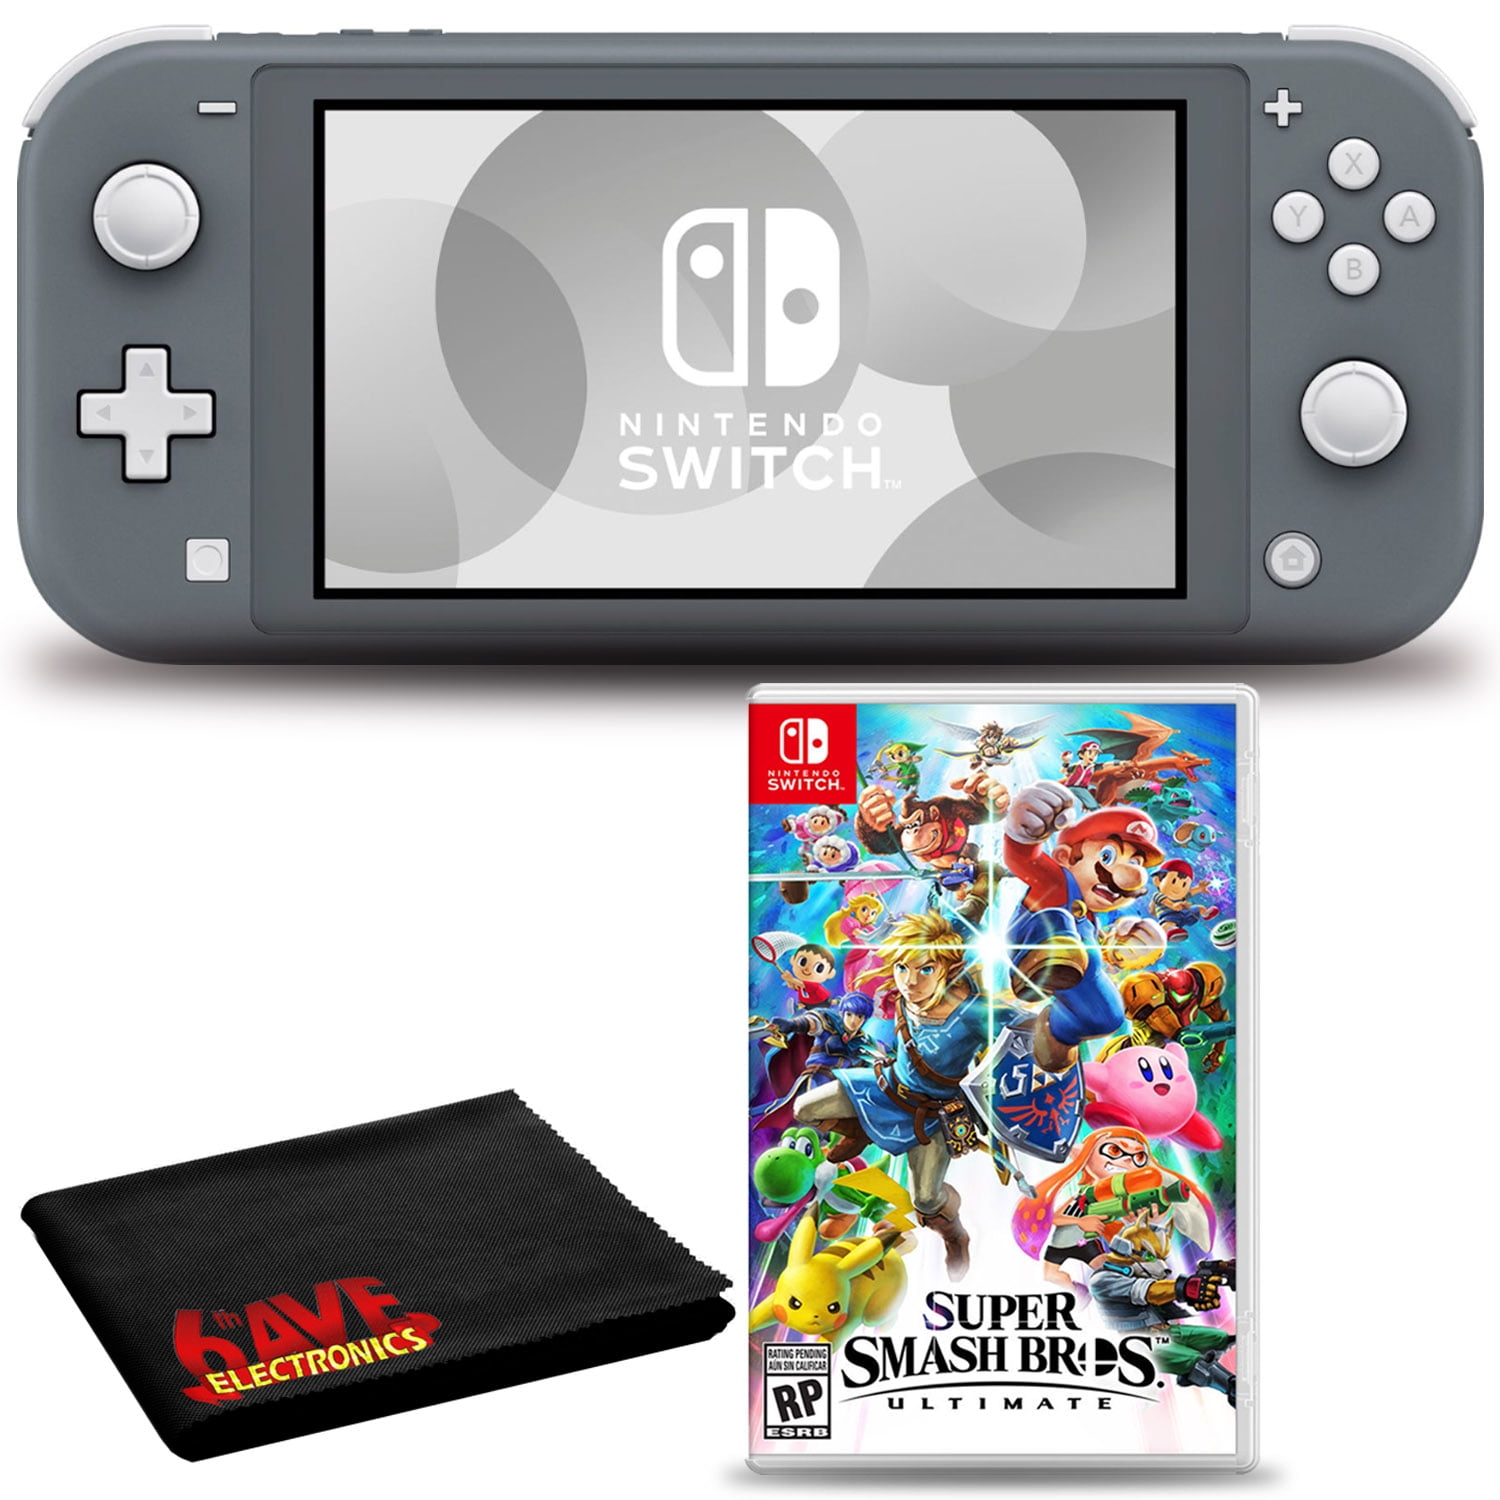 Nintendo (Gray) Bundle with Super Smash Bros. and 6Ave Cleaning Kit - Walmart.com